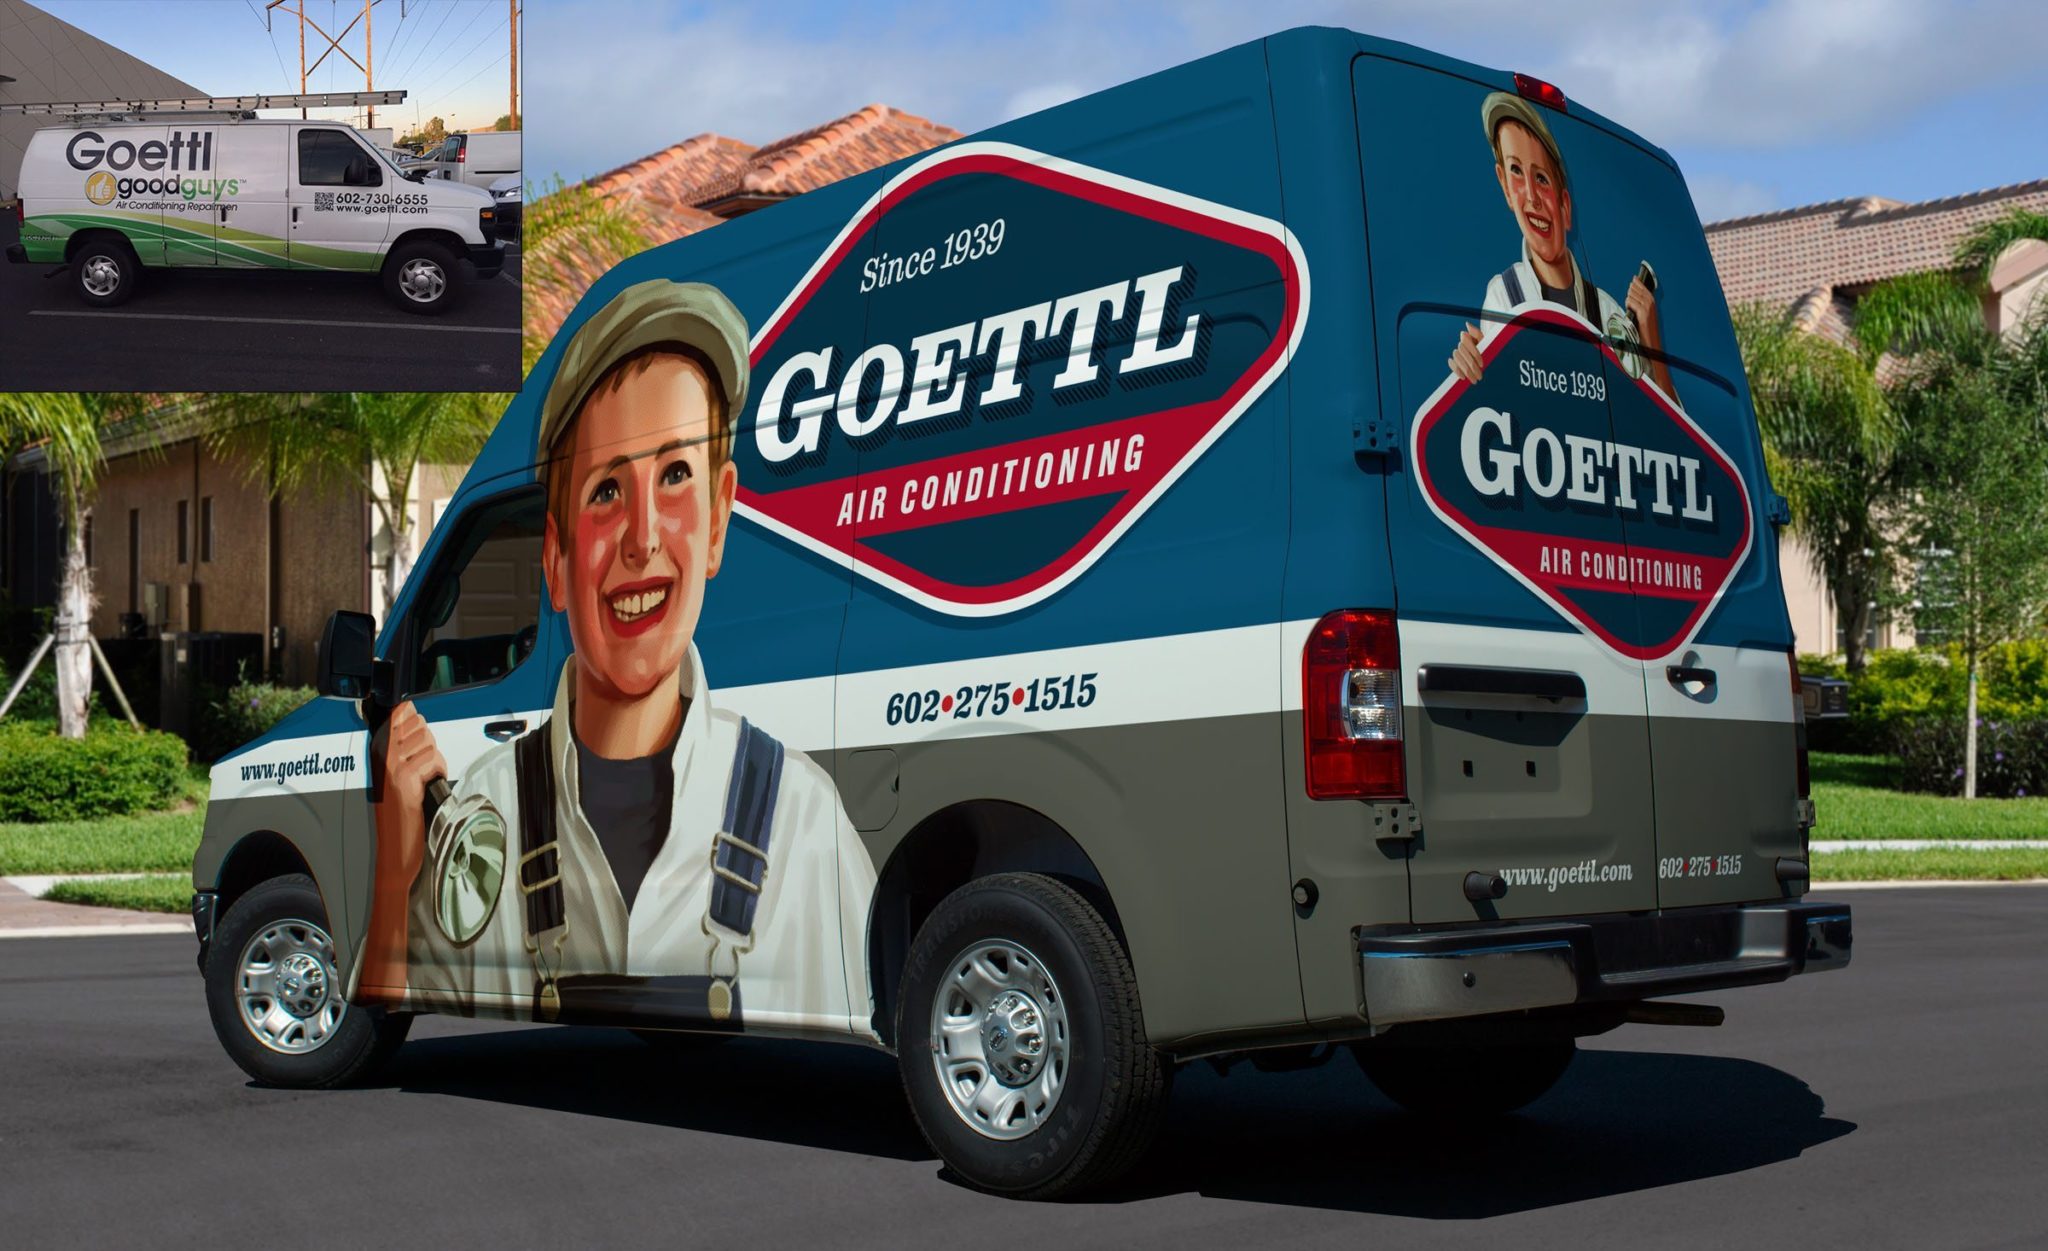 Before and after truck wrap design for this air conditioning contractor. The best vehicle wraps use simple graphics that are easy to read, as the new wrap for Goettl Air Conditioning shows.